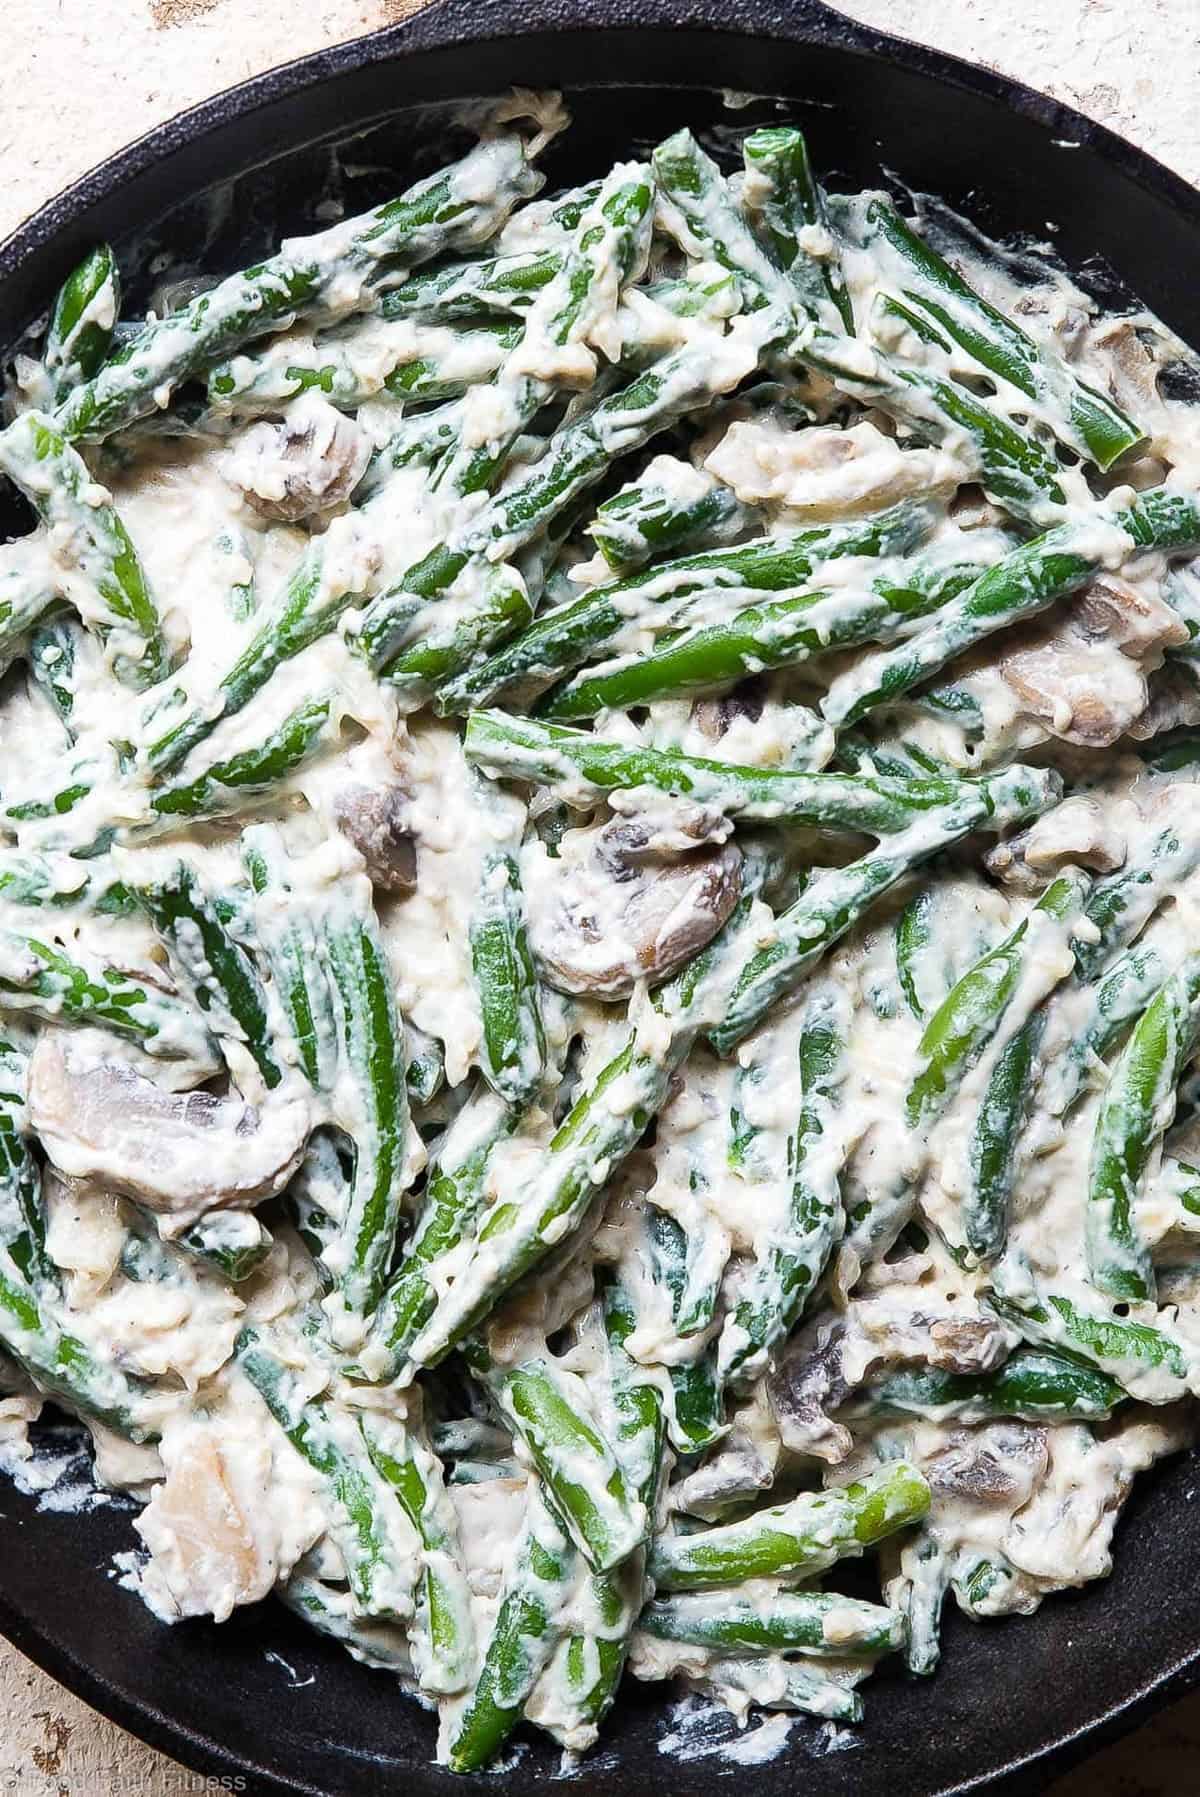 Low Carb Keto Green Beans Casserole - This Low Carb gluten free Green Bean Casserole recipe is an EASY, healthy remake of the classic side! No one will know it's better for you! Dairy free option included! | #Foodfaithfitness | #Glutenfree #Dairyfree #Keto #Lowcarb #Healthy